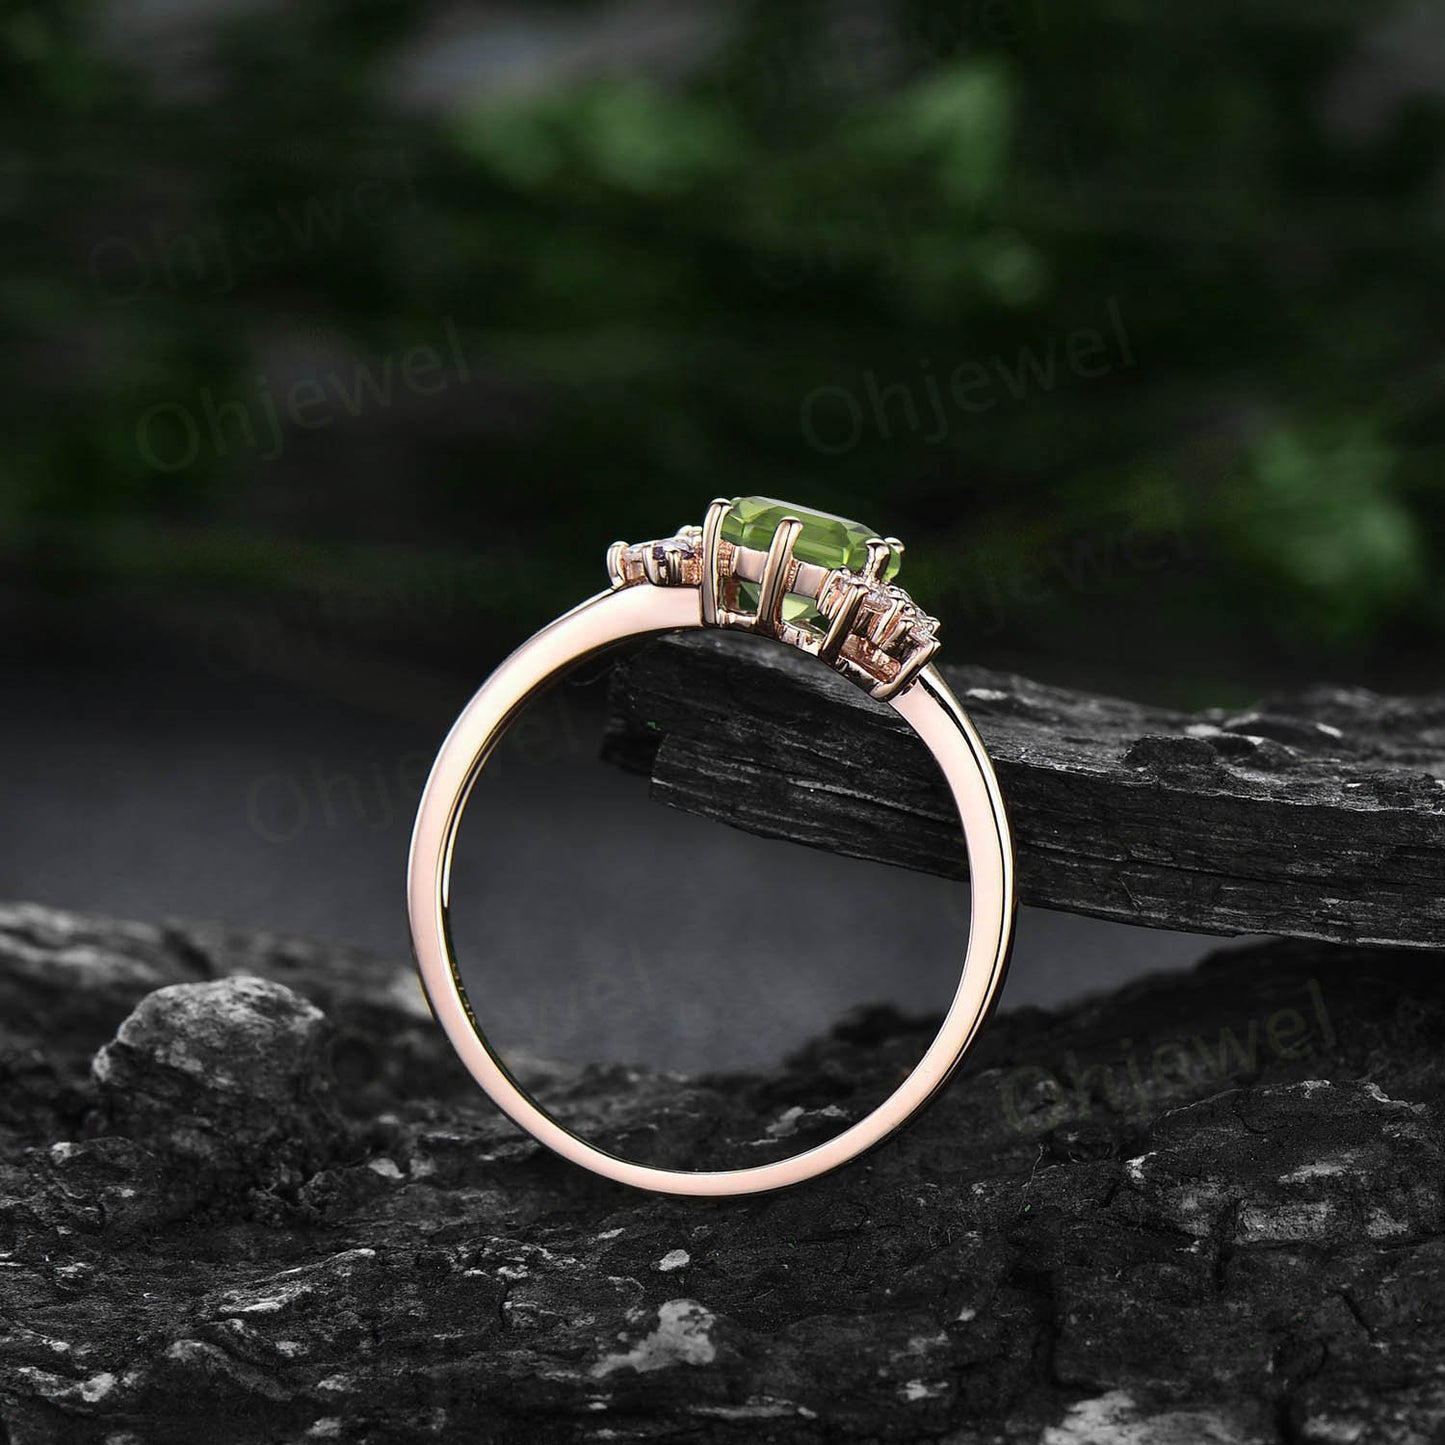 Peridot ring vintage Hexagon cut peridot engagement ring rose gold unique cluster engagement ring women marquise cut diamond promise ring